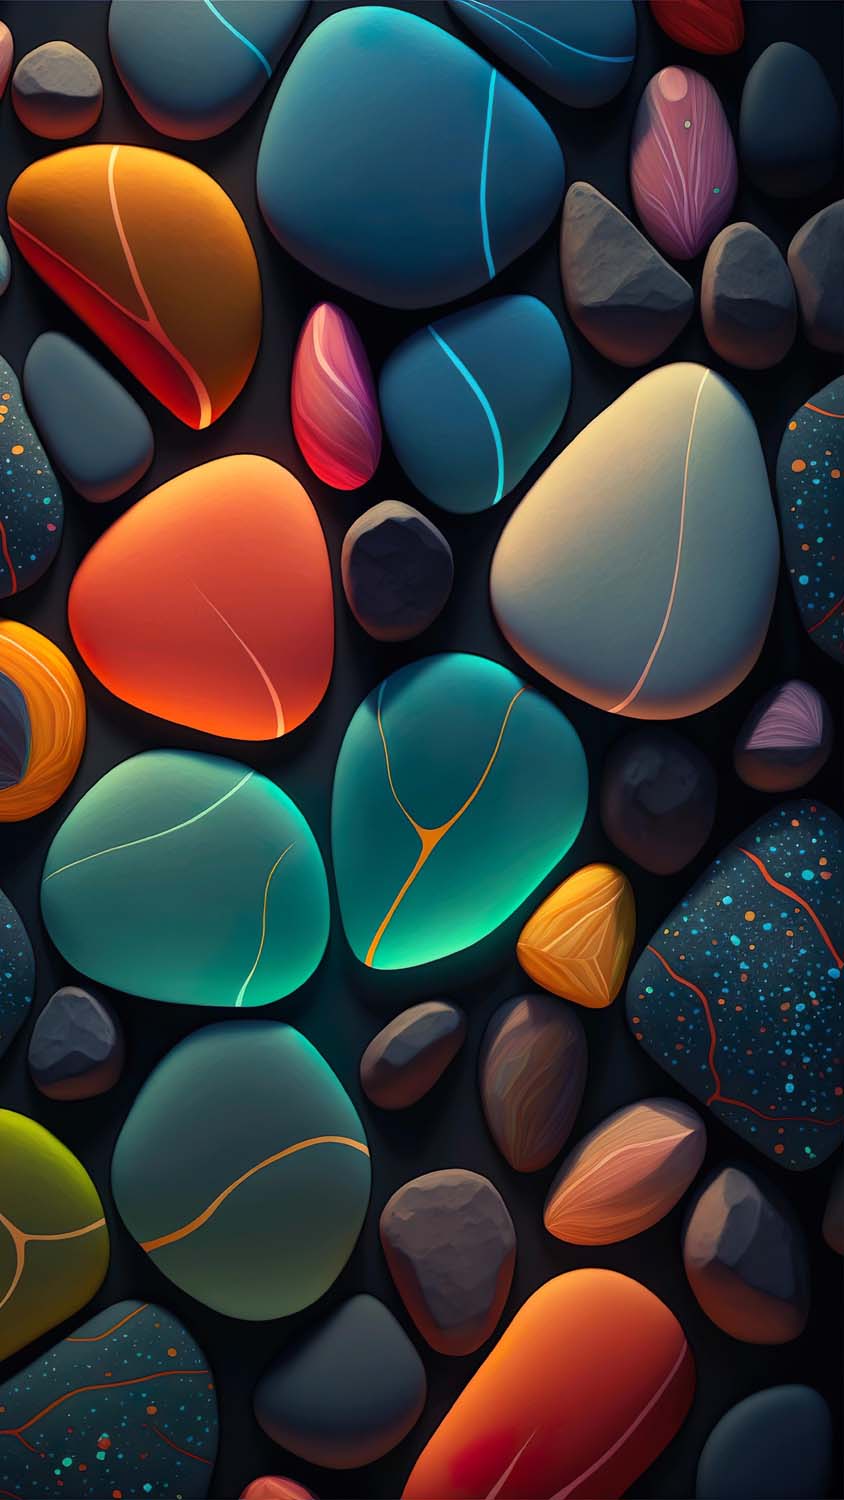 3D Pebbles IPhone Wallpaper HD - IPhone Wallpapers : iPhone Wallpapers